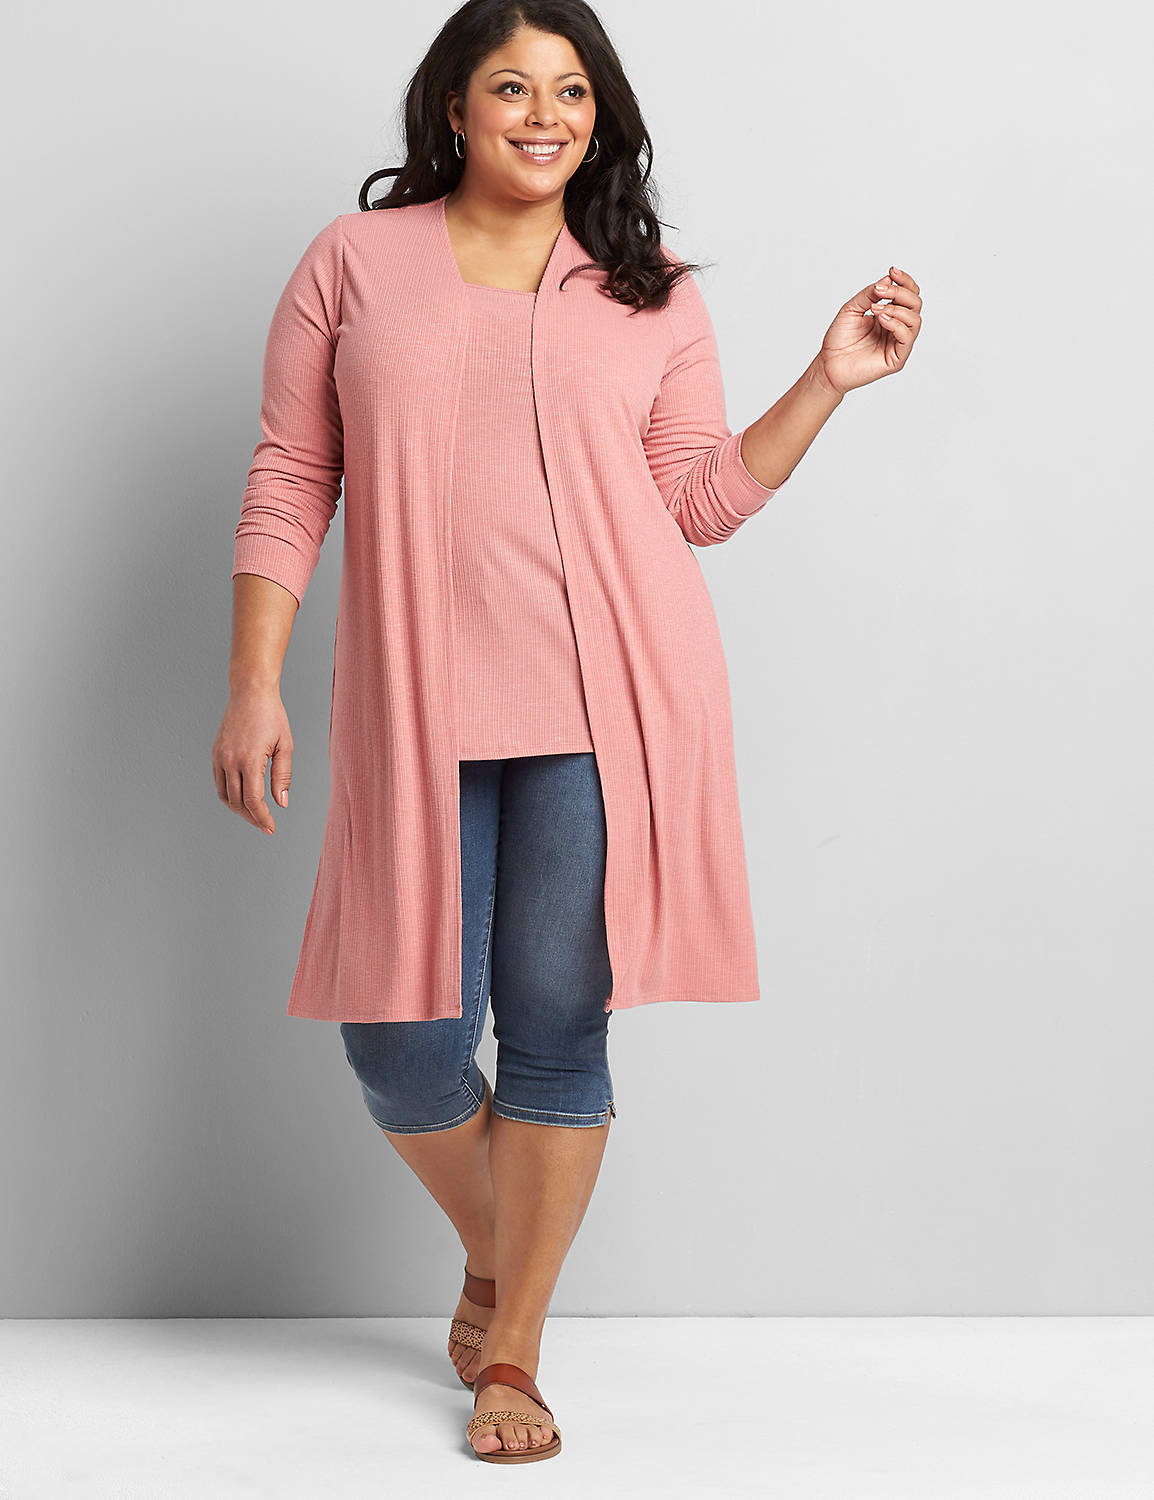 Long Sleeve V Neck Double Tie Front Duster 1118694:PANTONE Dusty Rose:18/20 Product Image 3